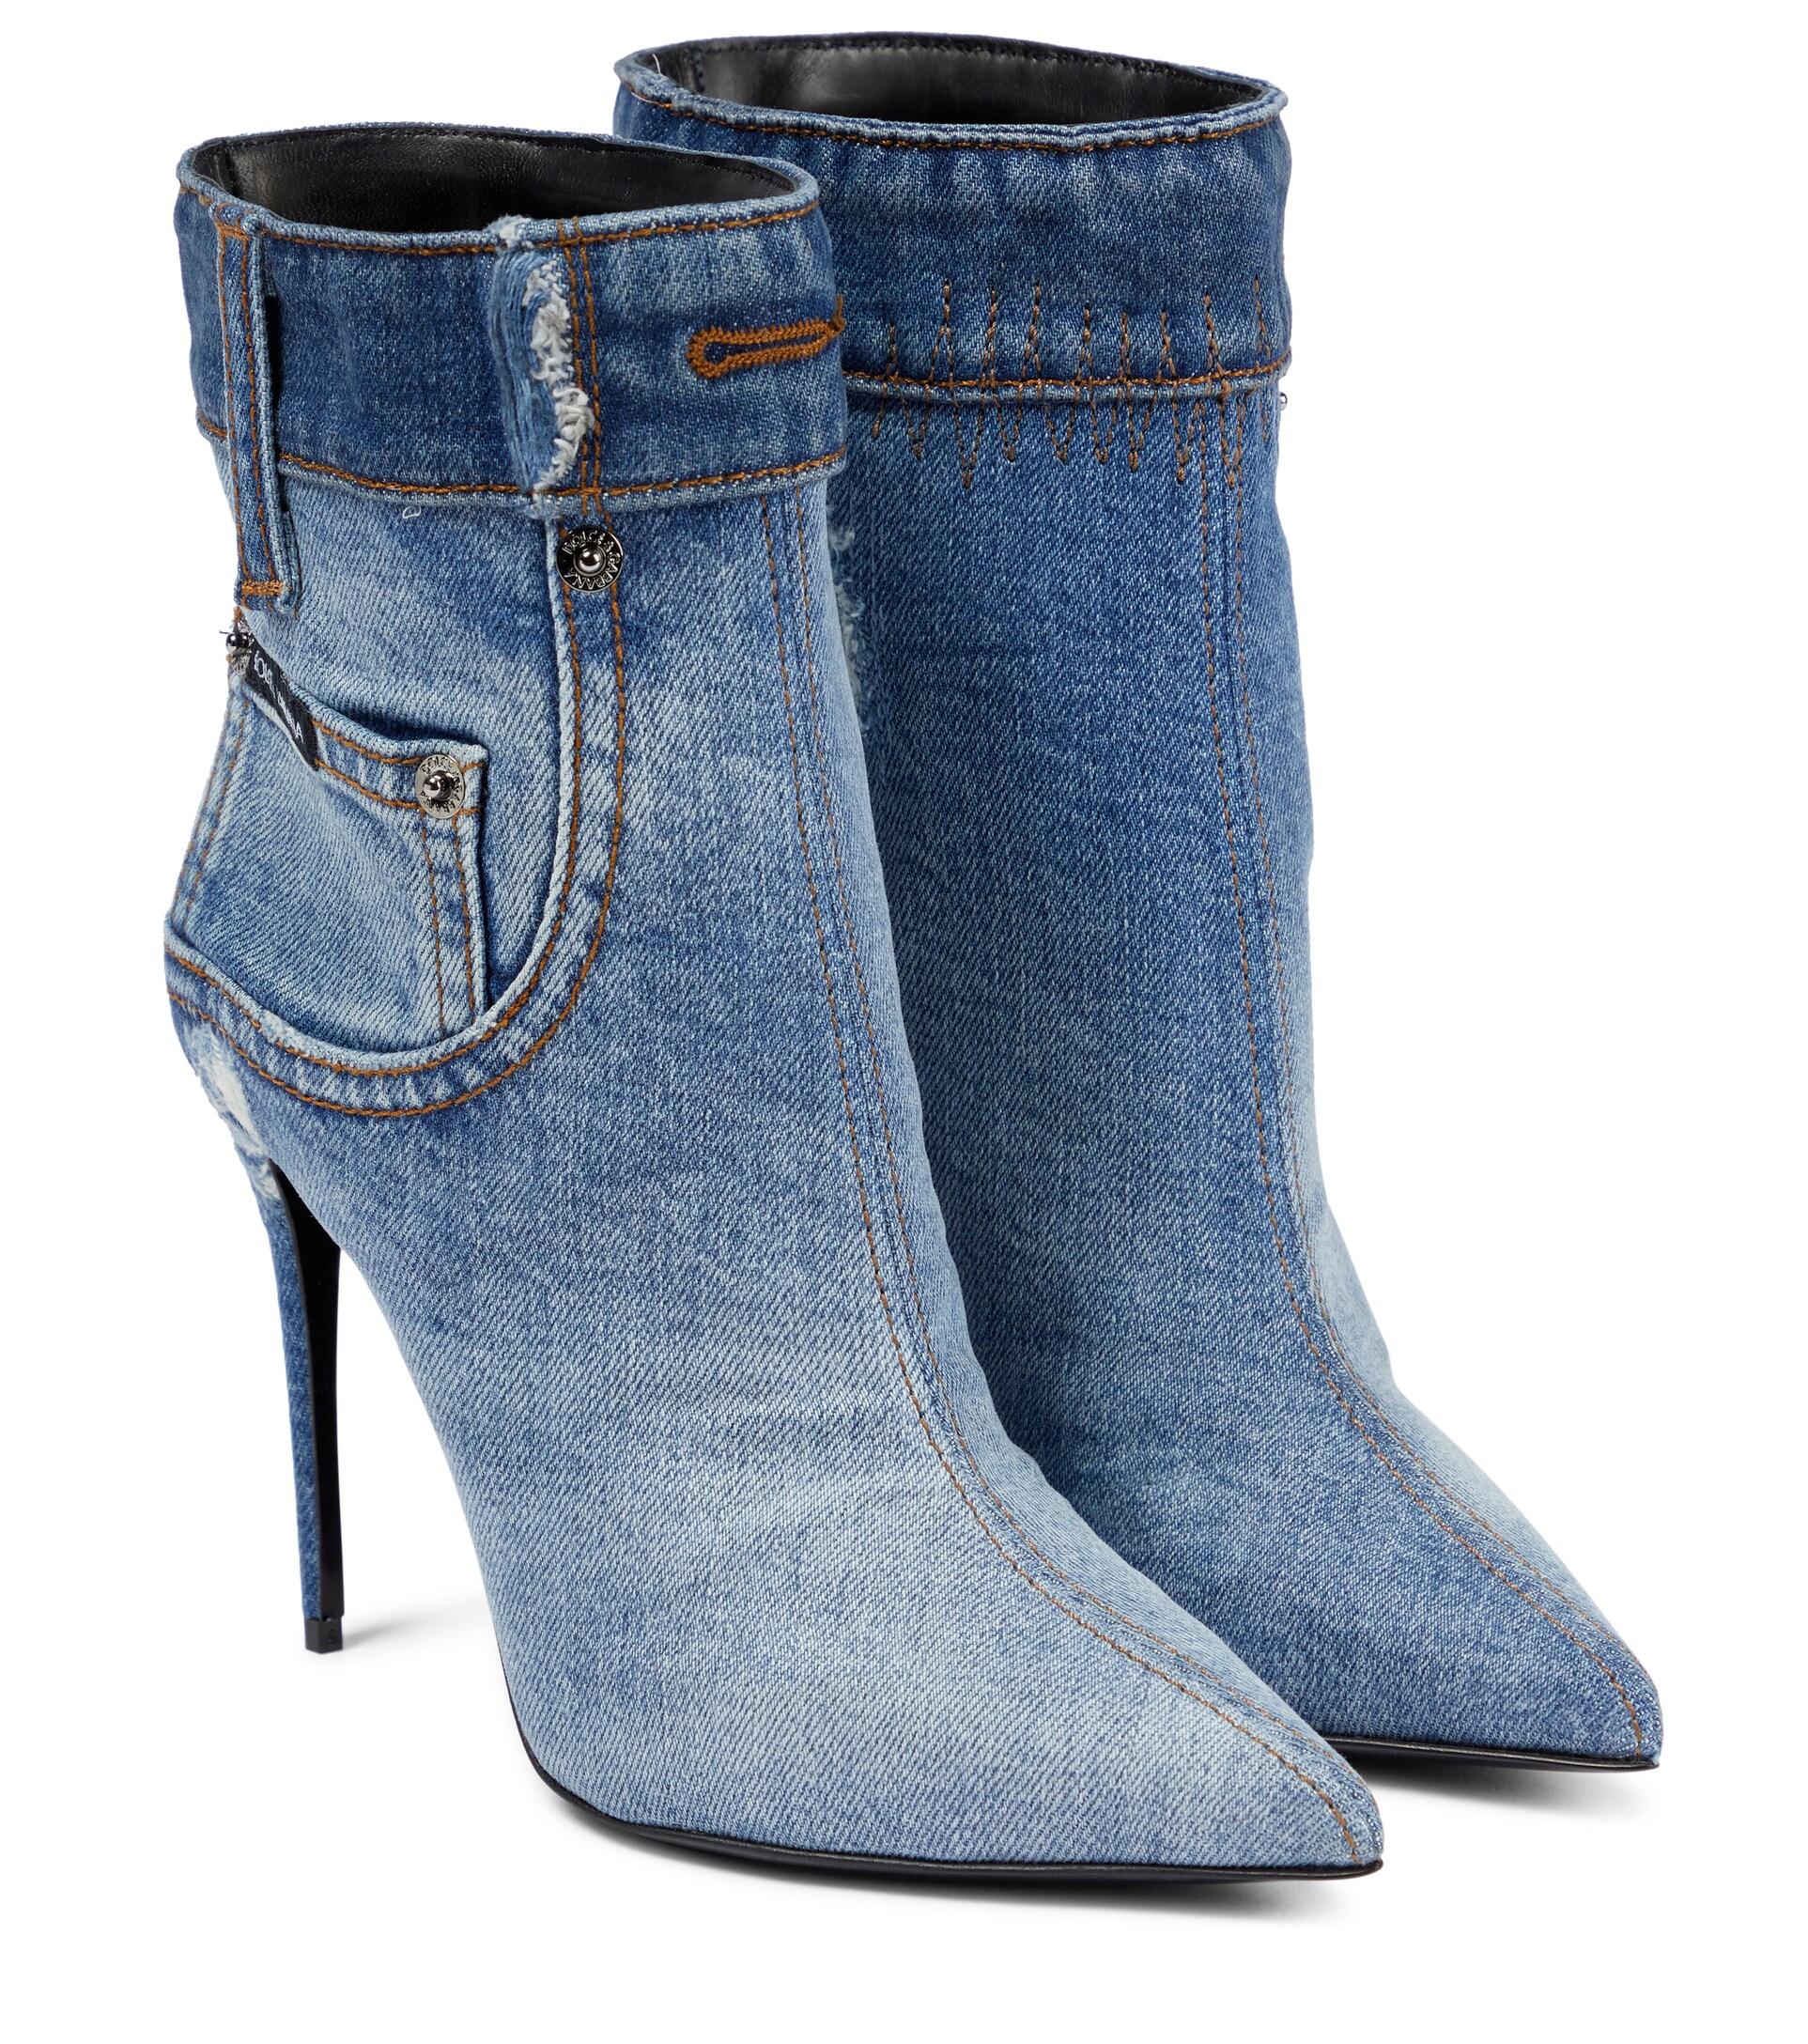 Dolce & Gabbana Cardinale Denim Ankle Boots in Blue | Lyst